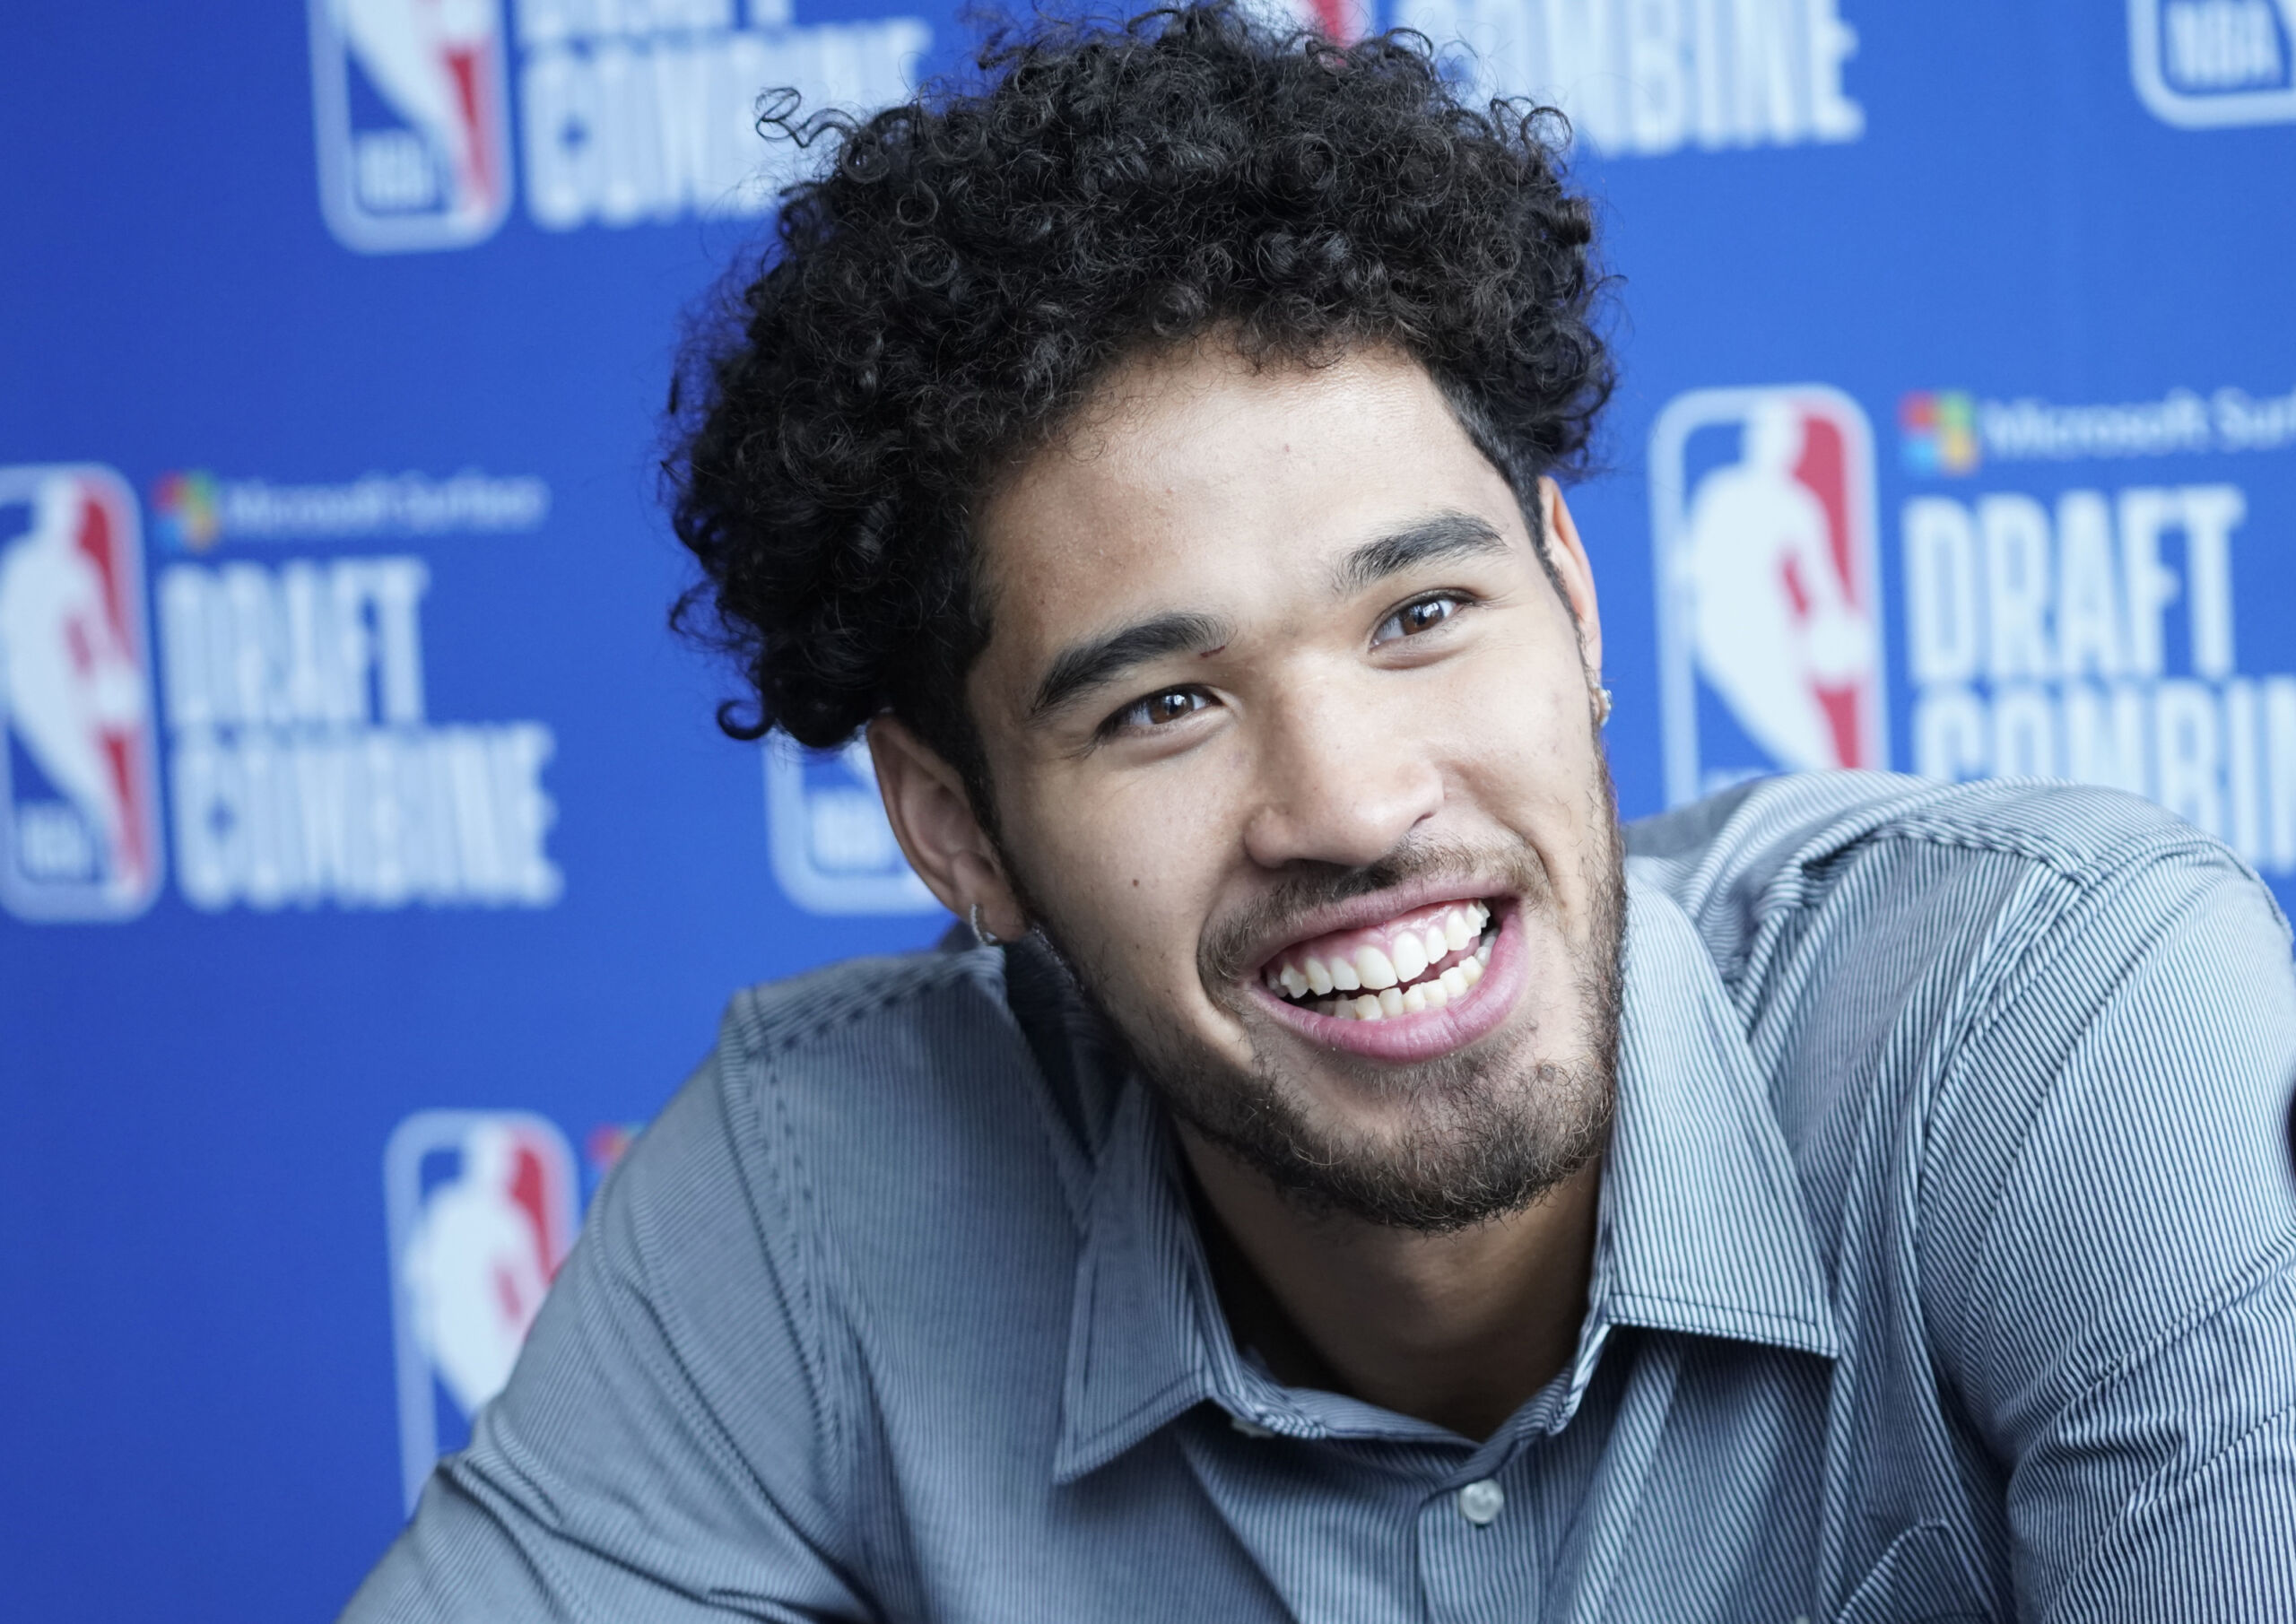 Utah Jazz - We have officially signed Johnny Juzang to a two-way